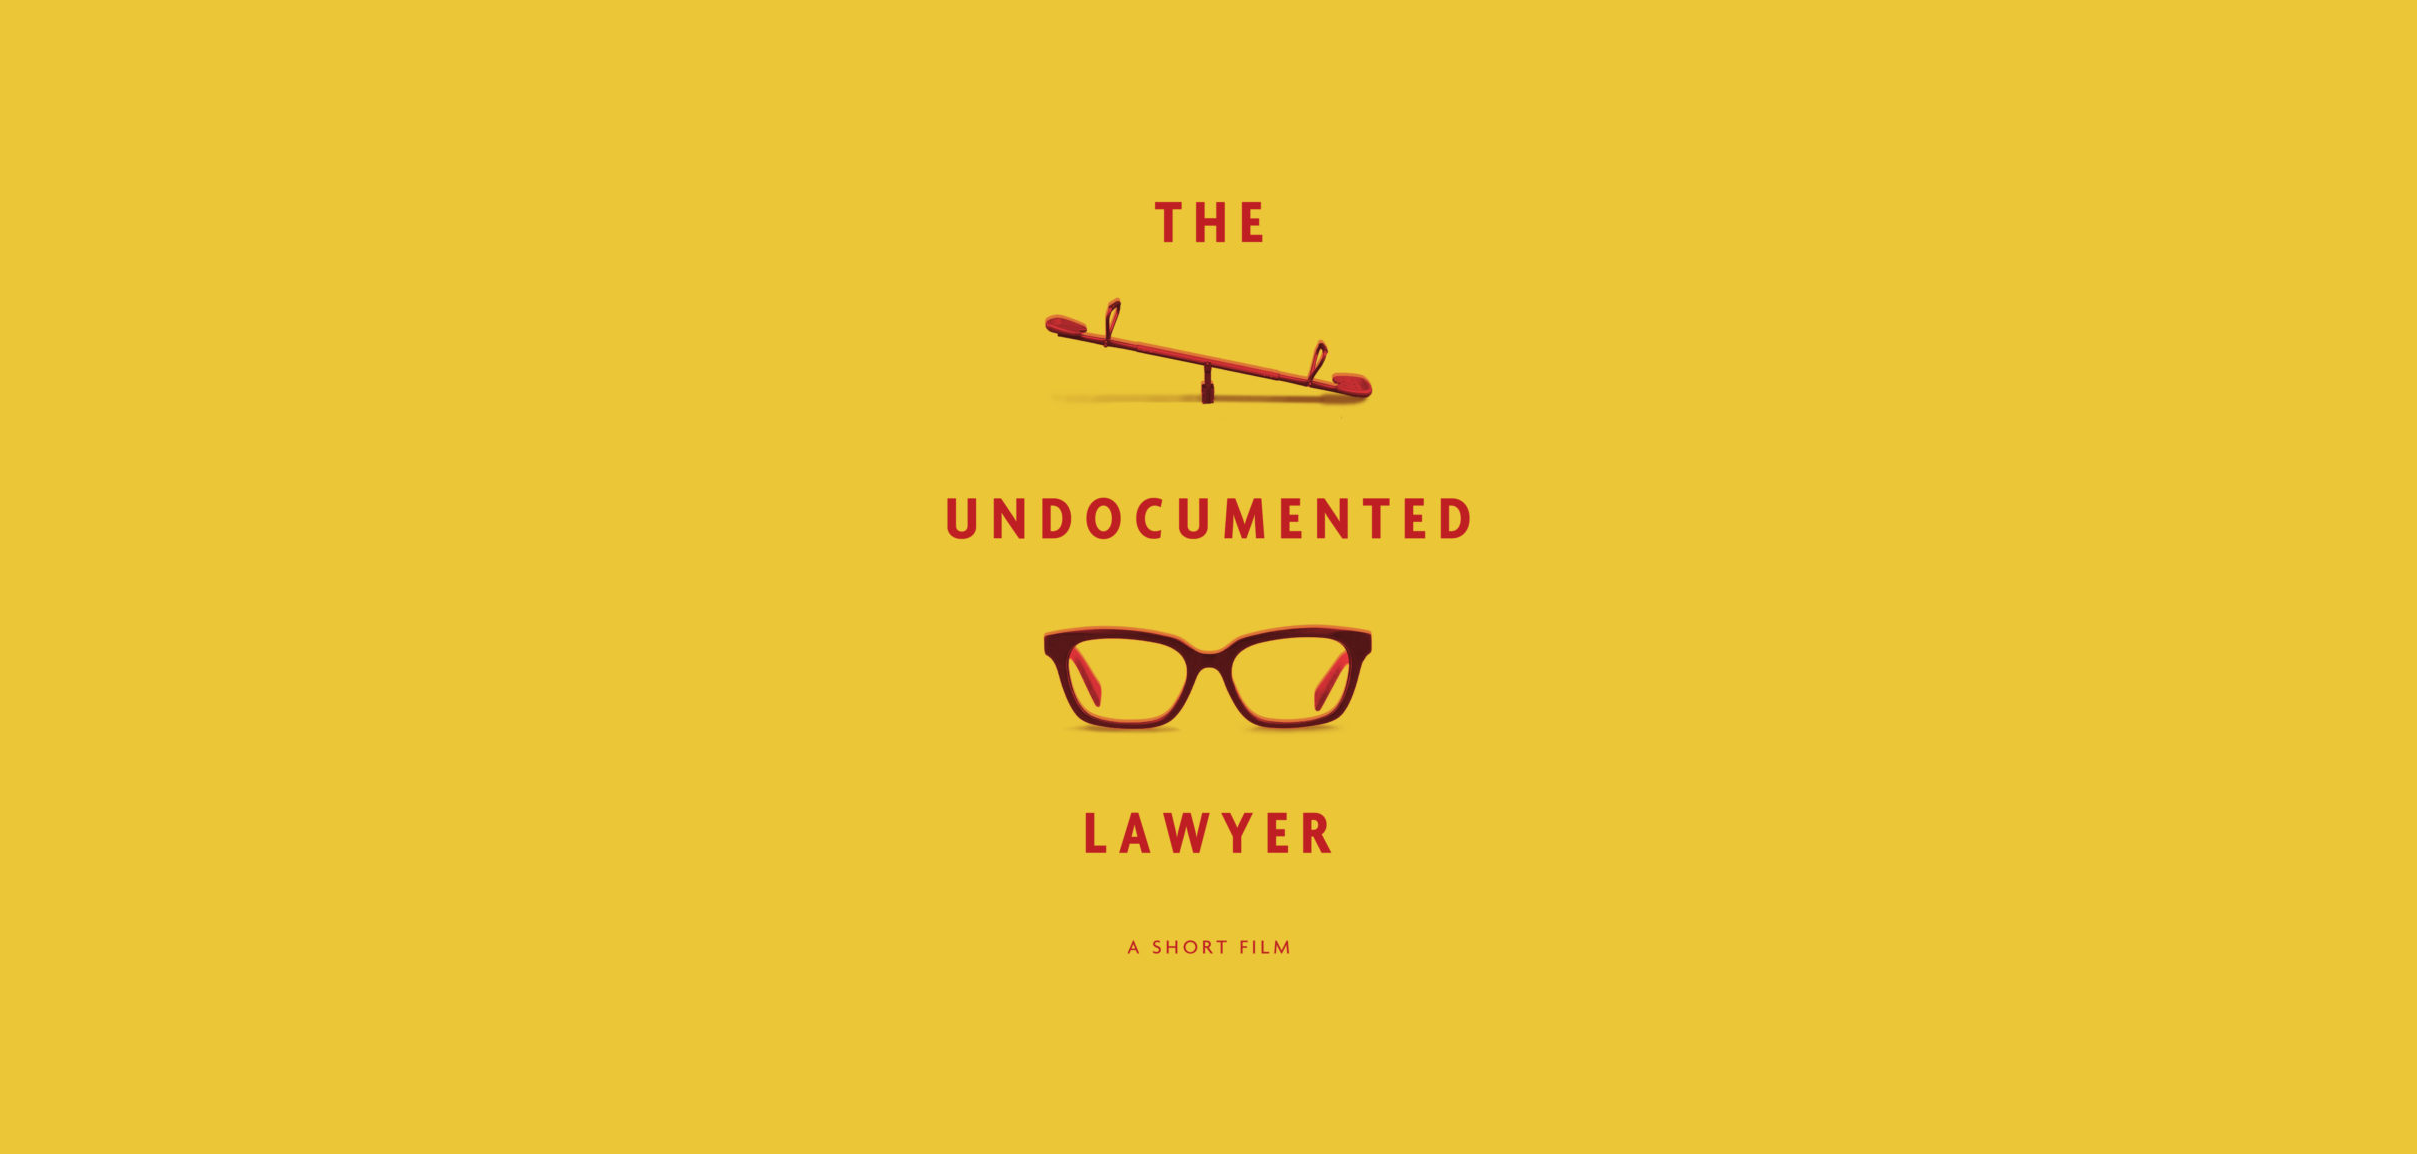 THE UNDOCUMENTED LAWYER